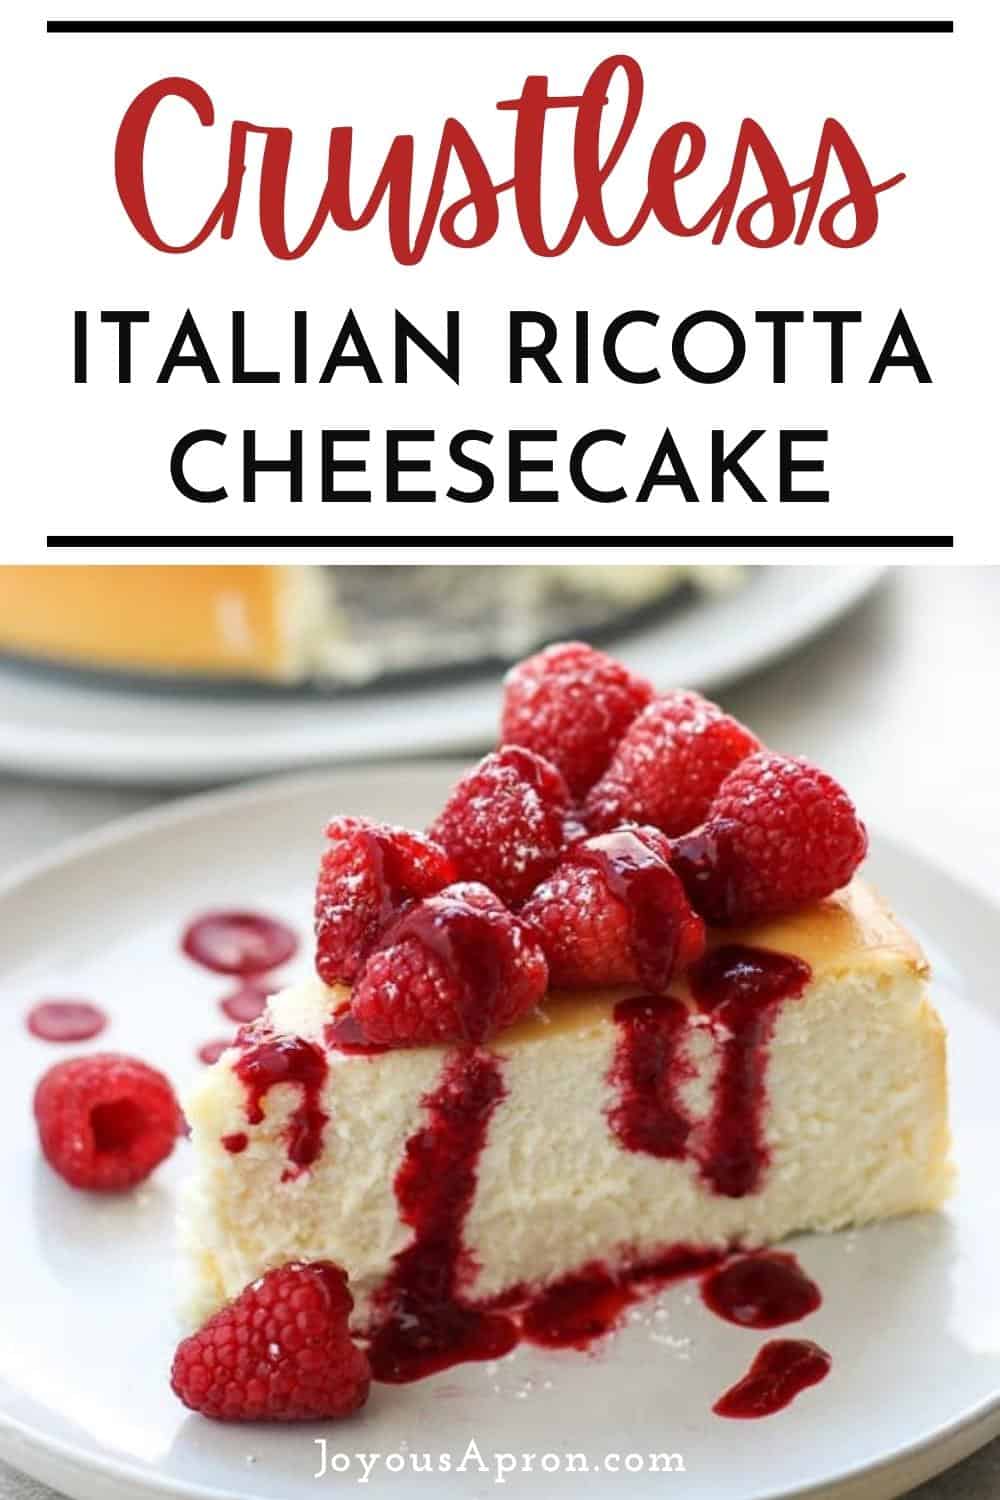 Italian Cheesecake - crustless Italian ricotta cheesecake is the perfect dessert and sweet treat! Light and fluffy, top with fresh raspberry and raspberry sauce for the ultimate cheesecake experience! via @joyousapron